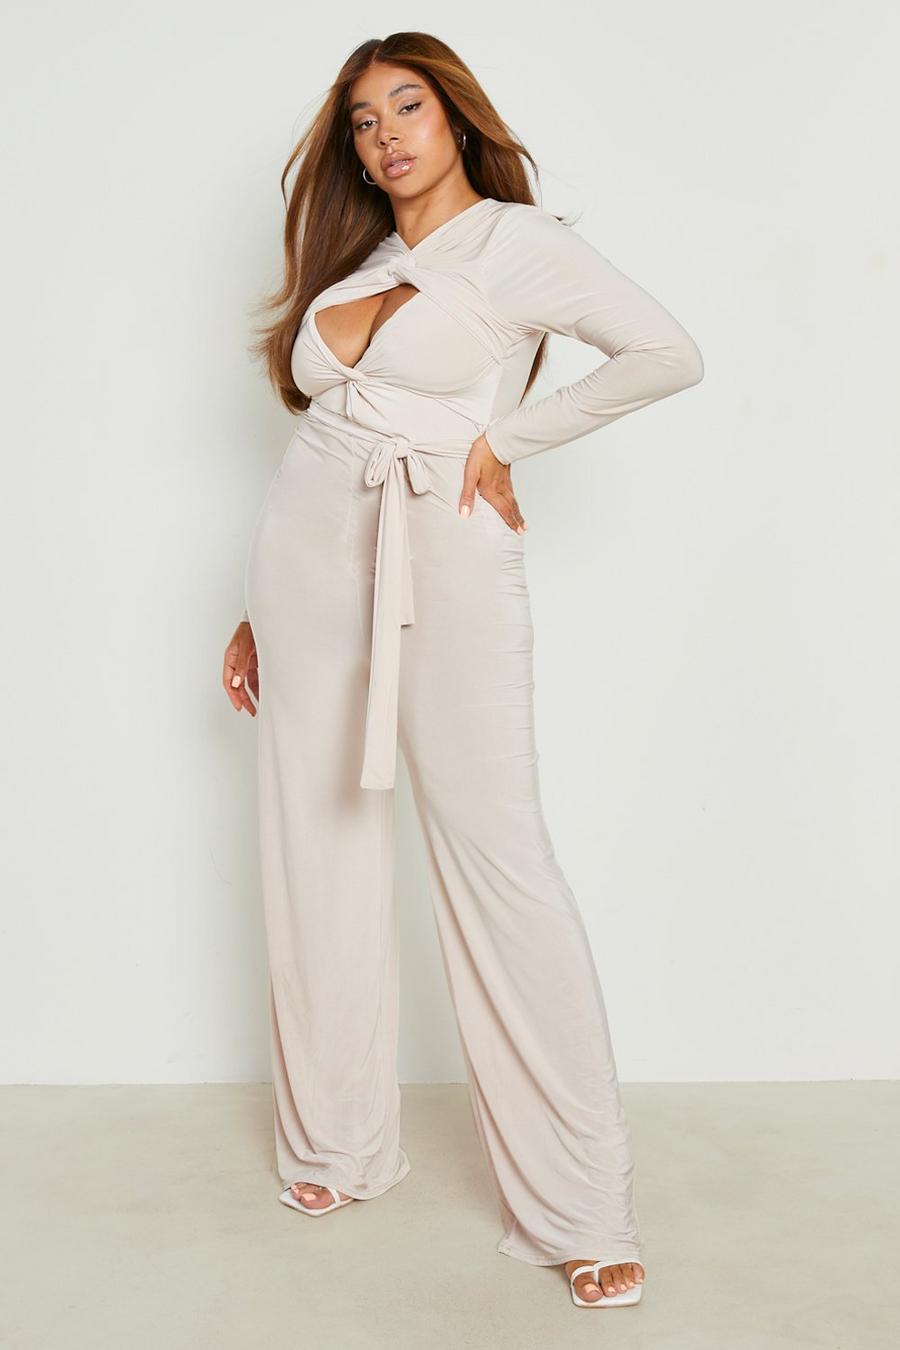 Cheap Playsuits | Shop all Jumpsuits sale at boohoo